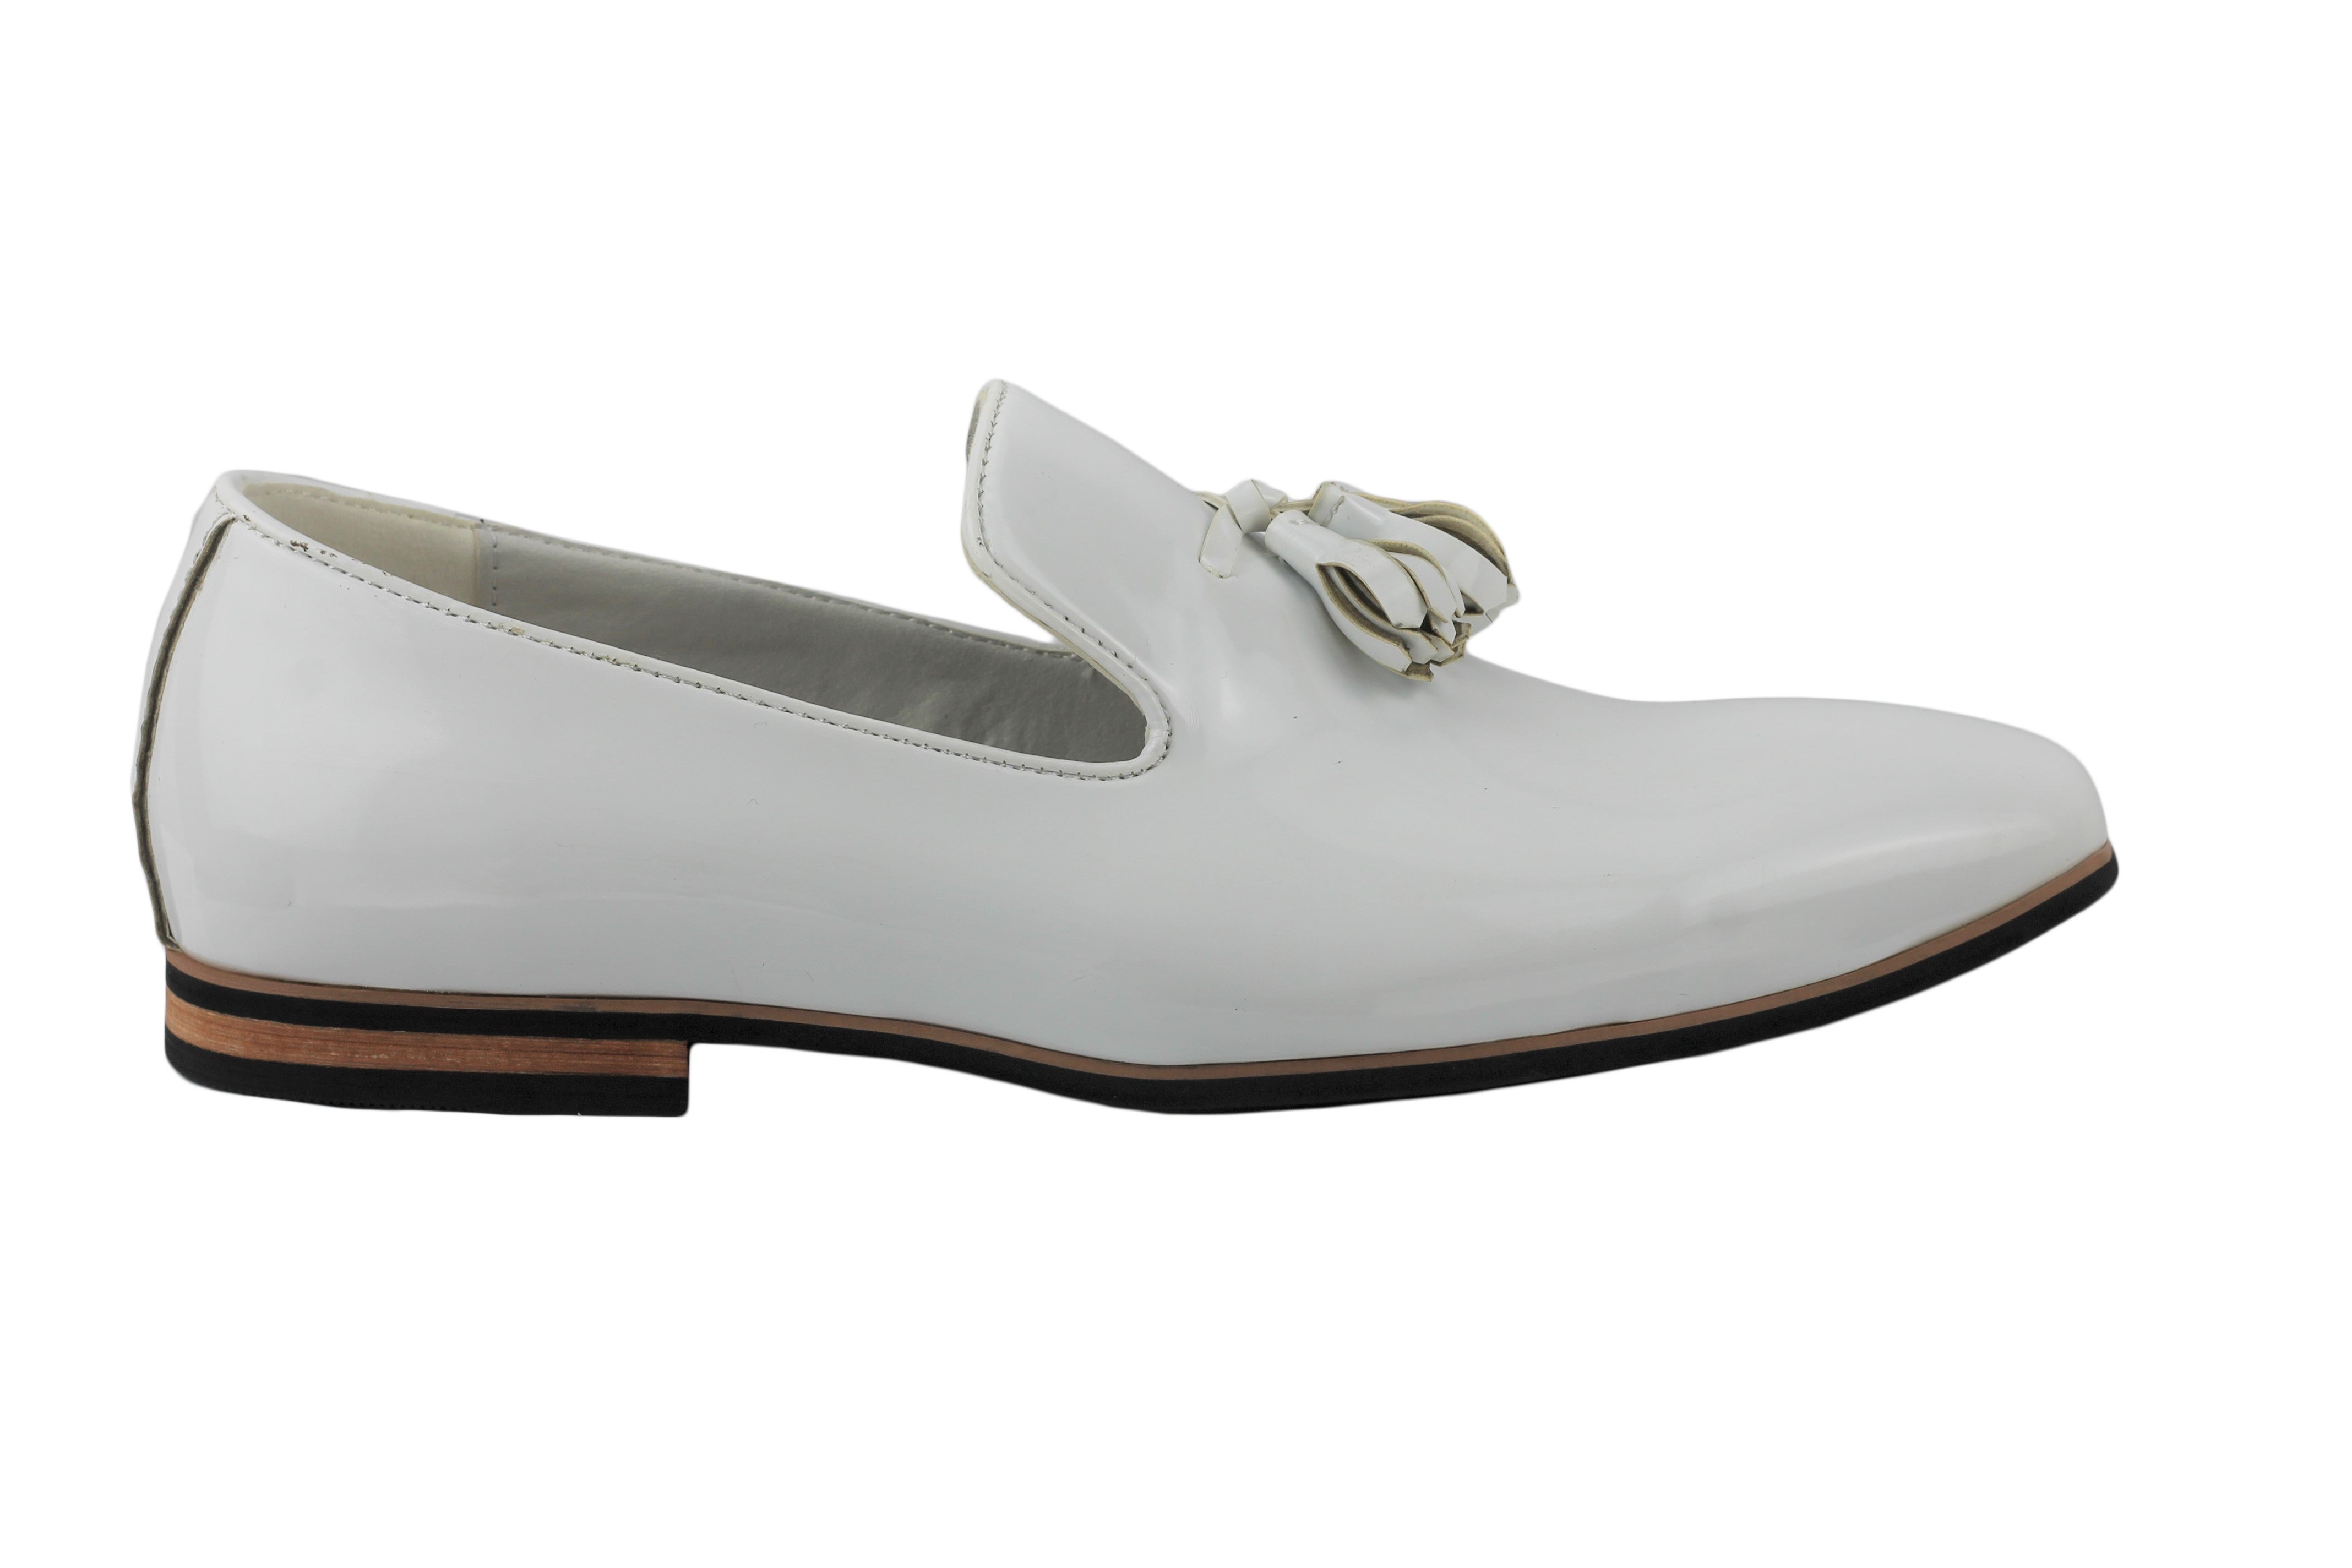 Shiny Patent Leather Slip On Shoes